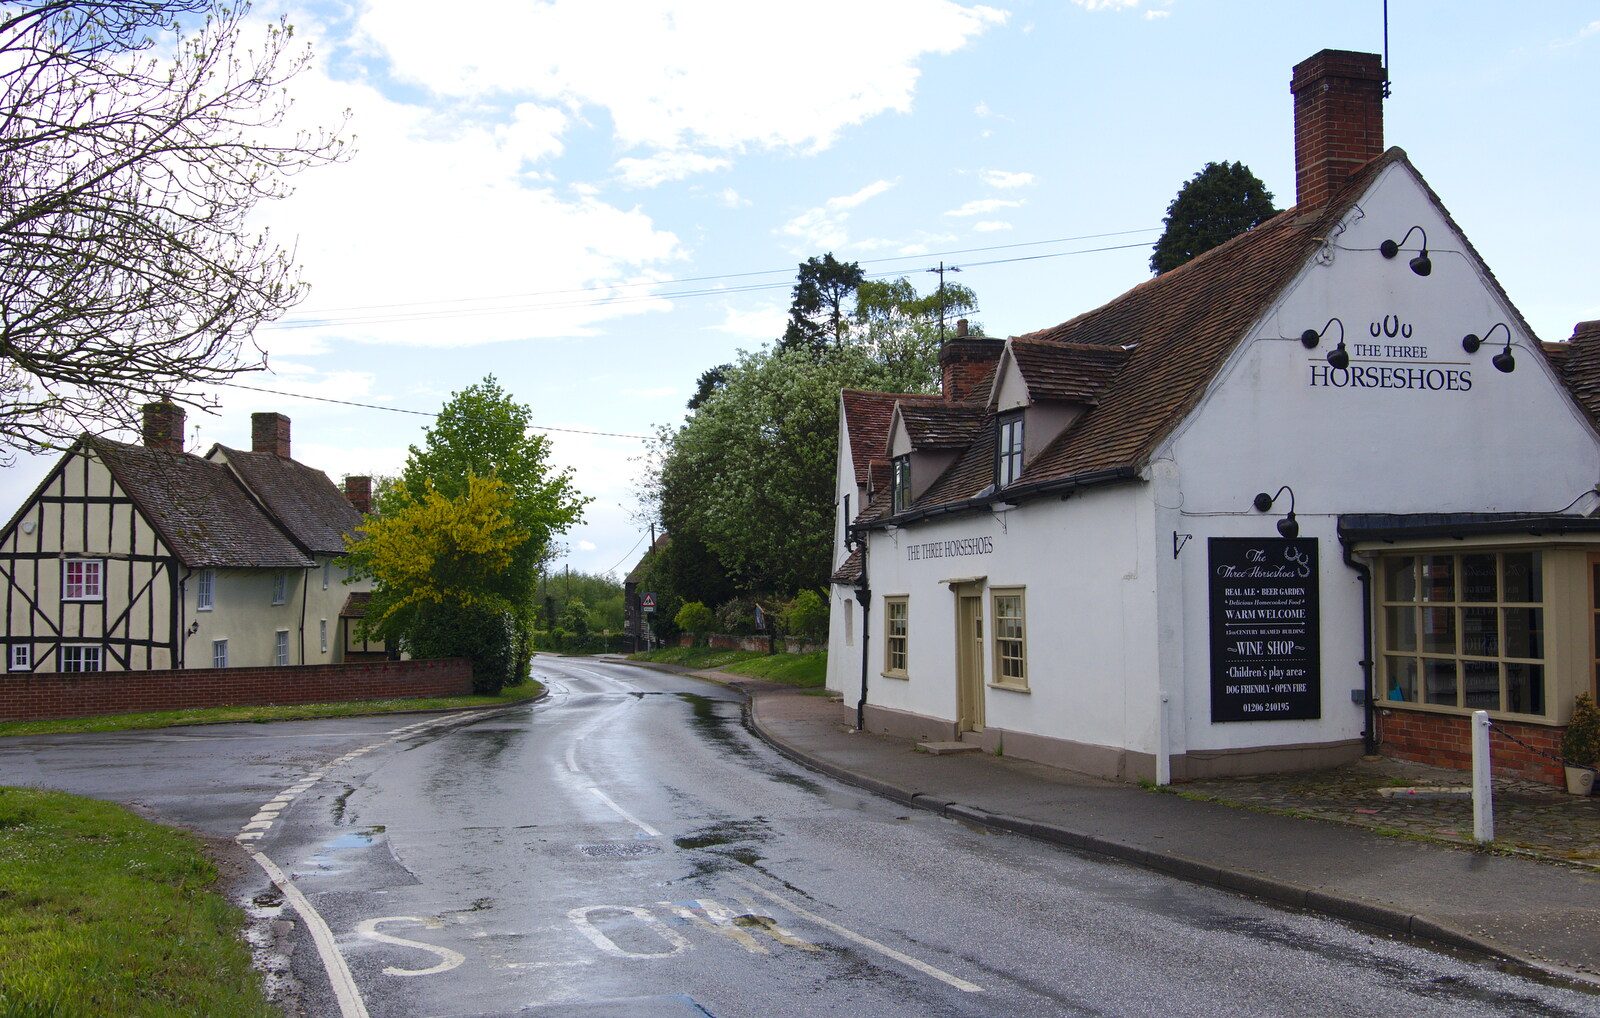 The Three Horseshoes from The BSCC Bike Ride 2019, Coggeshall, Essex - 11th May 2019